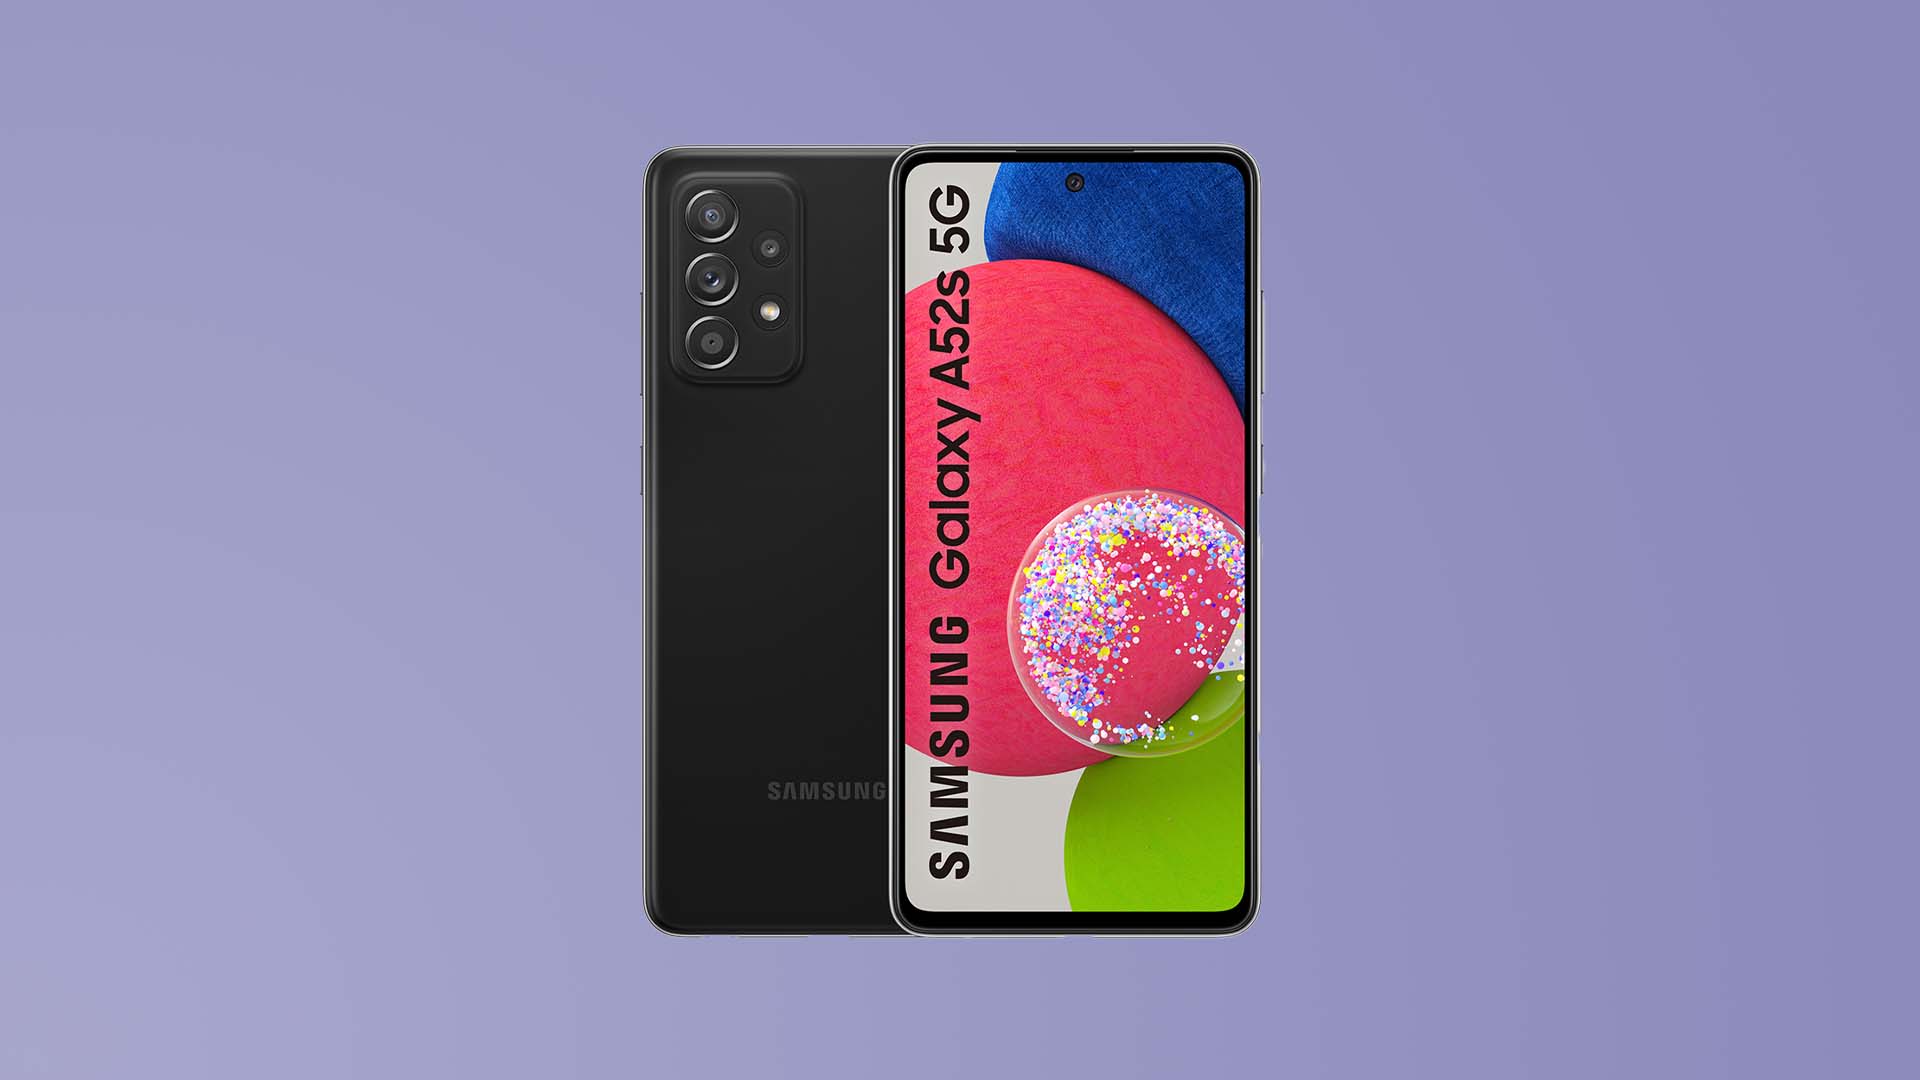 Samsung Galaxy A52s 5G Smartphone Review in Hindi - Know Price, Specifications, Connectivity Features, Camera, Battery, Connectivity, Ram, Storage, Colours Options etc